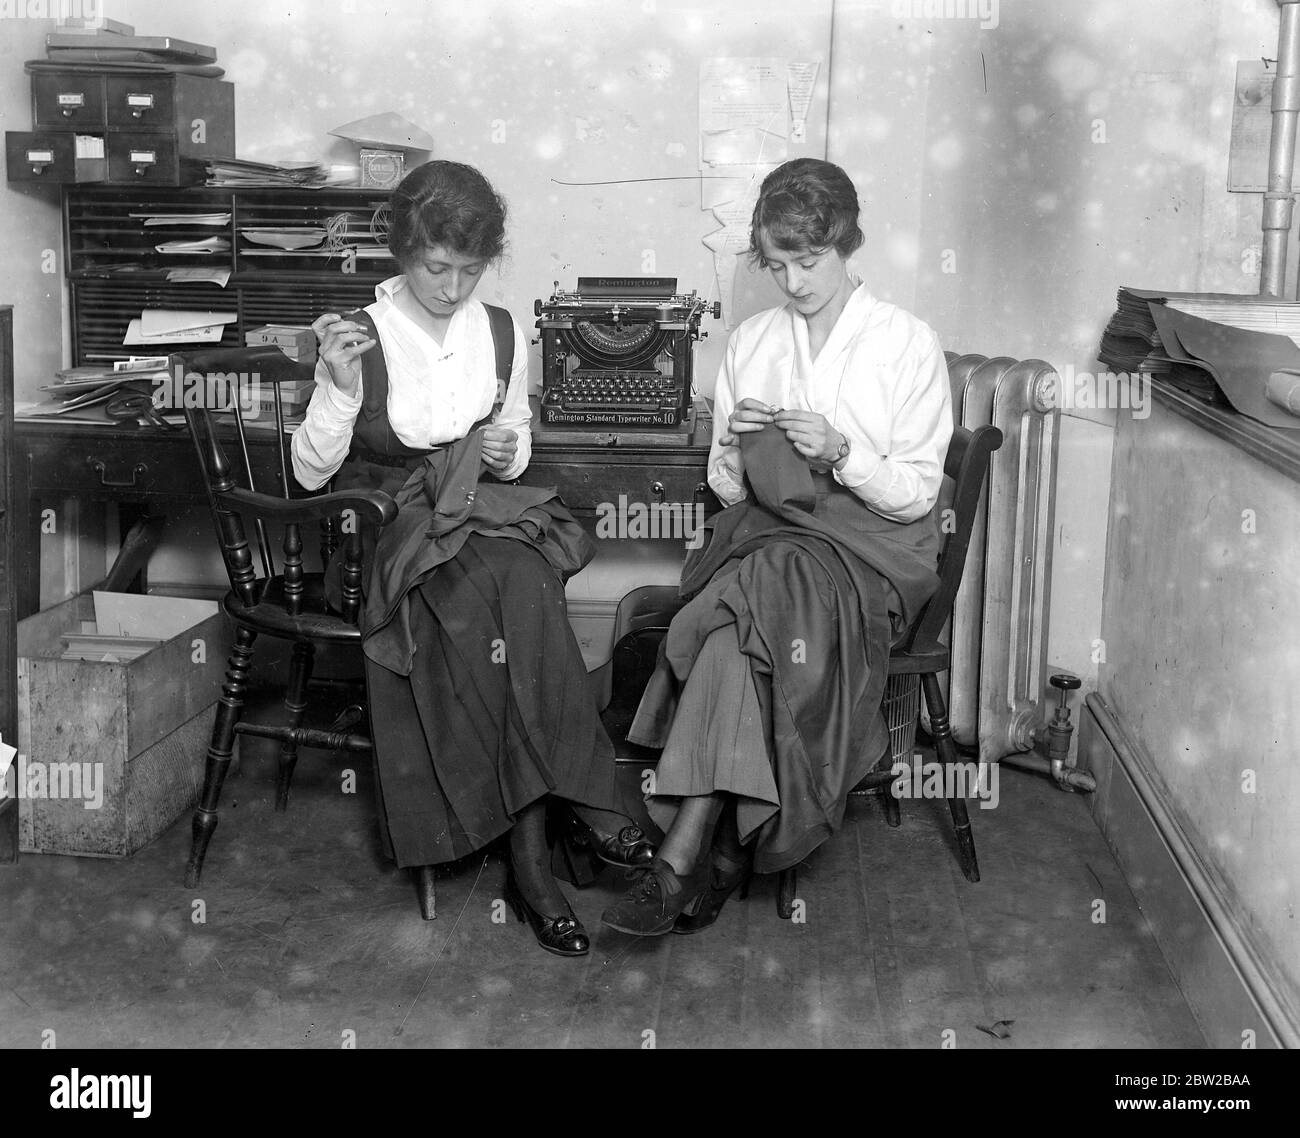 The Zeppelin raids - Making curtains in a city office. 1914-1918 Stock Photo